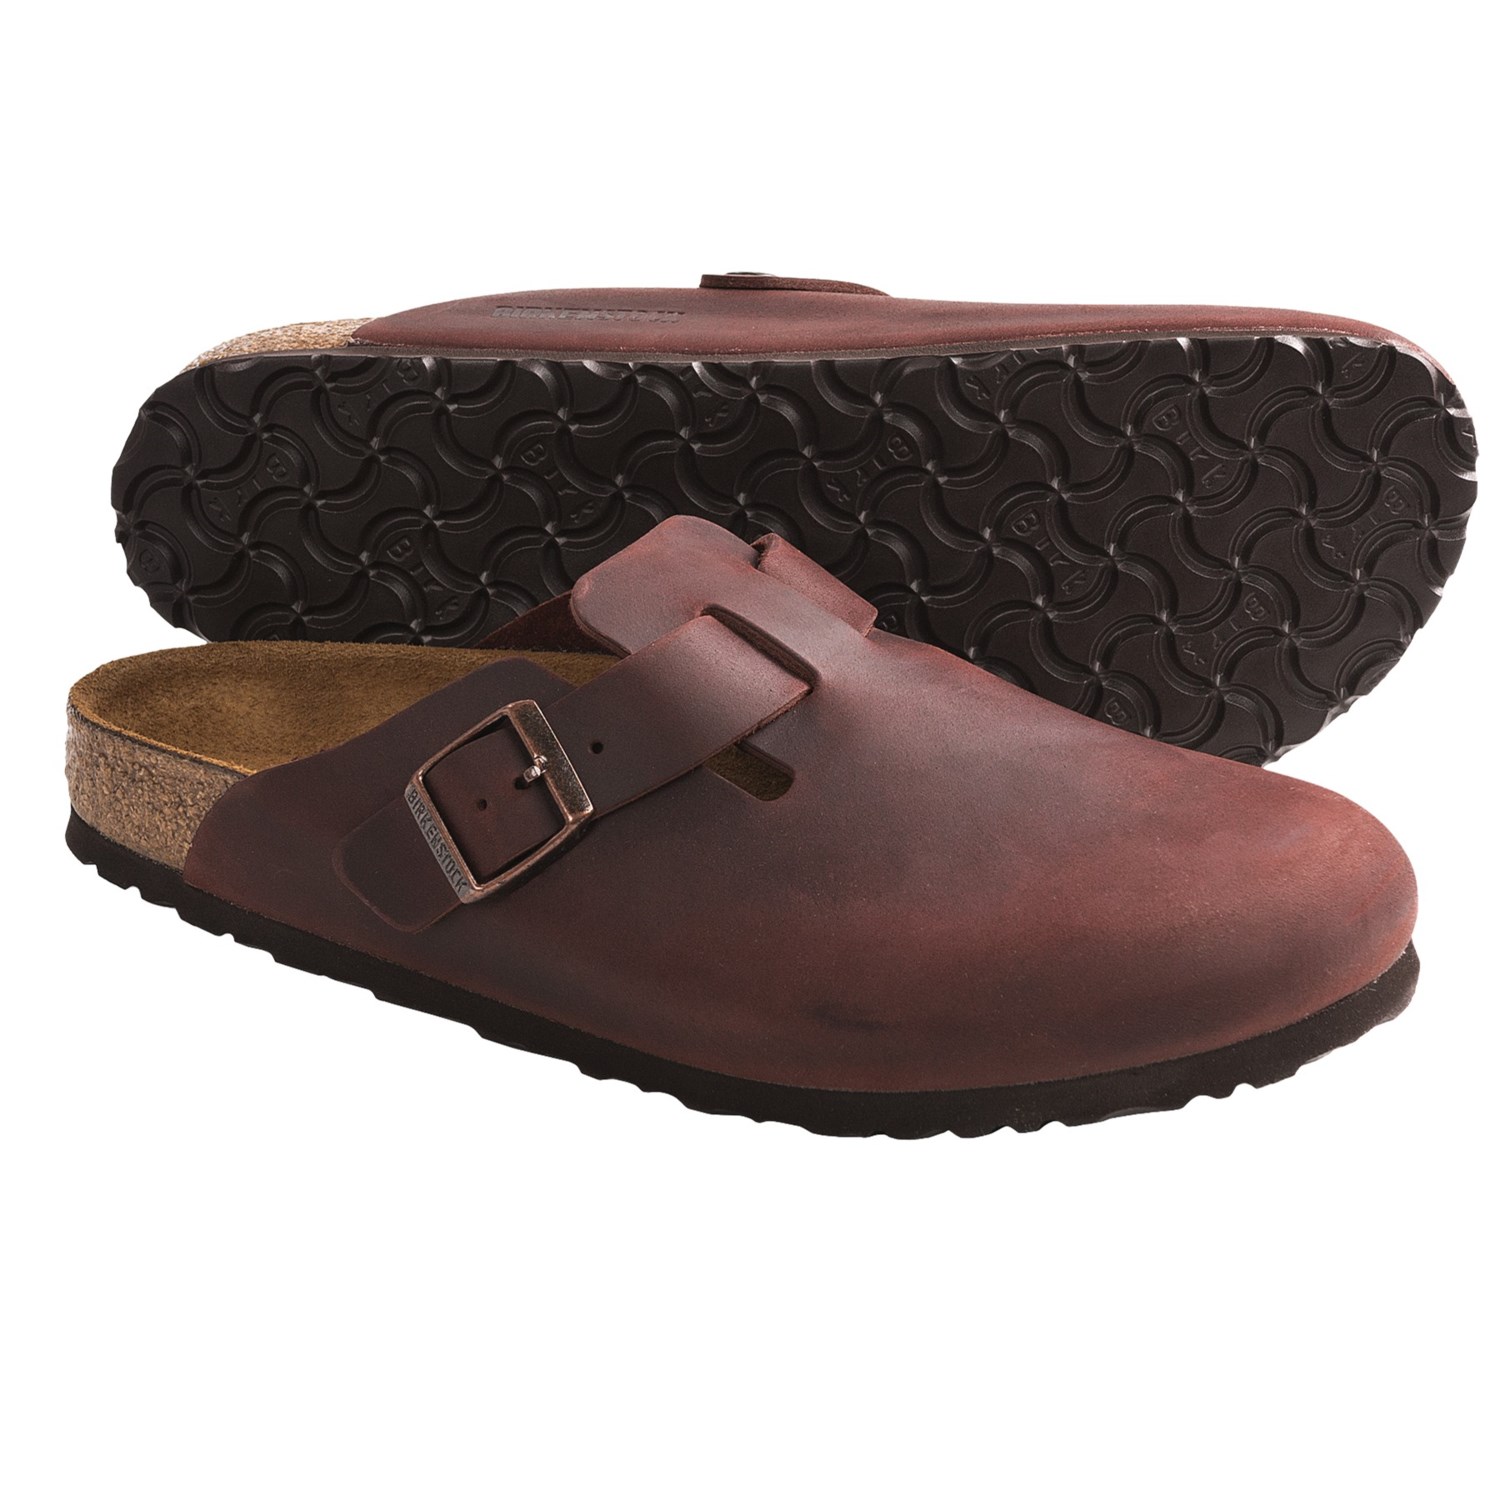 Birkenstock Boston Clogs - Leather (For Men and Women) in Waxy Leather ...